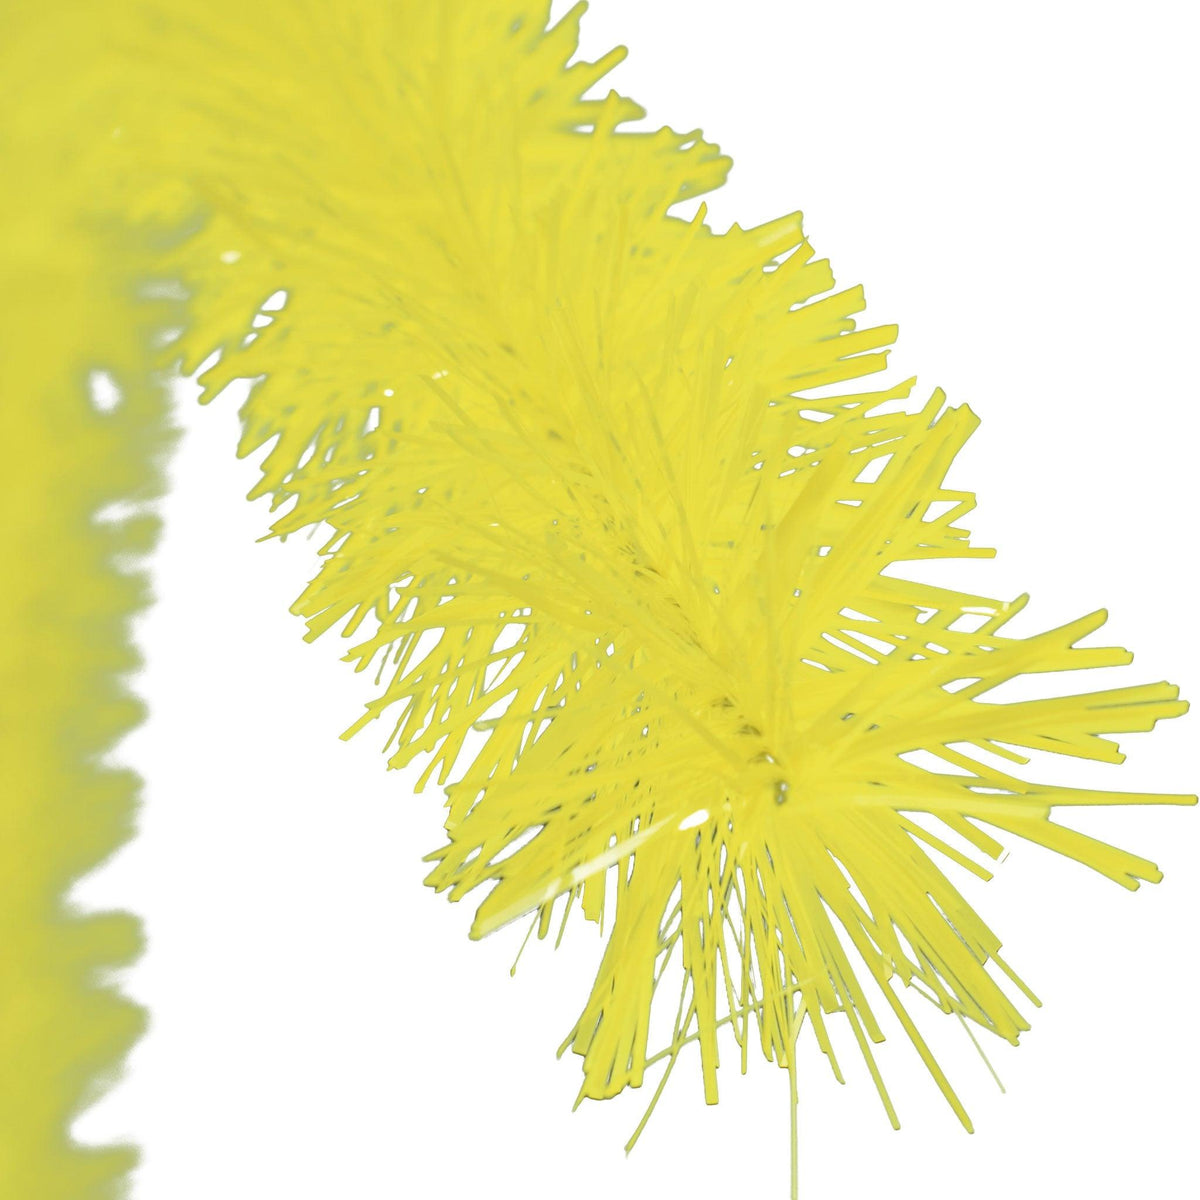 Lee Display's brand new 25ft Shiny Yellow Tinsel Garlands and Fringe Embellishments on sale at leedisplay.com